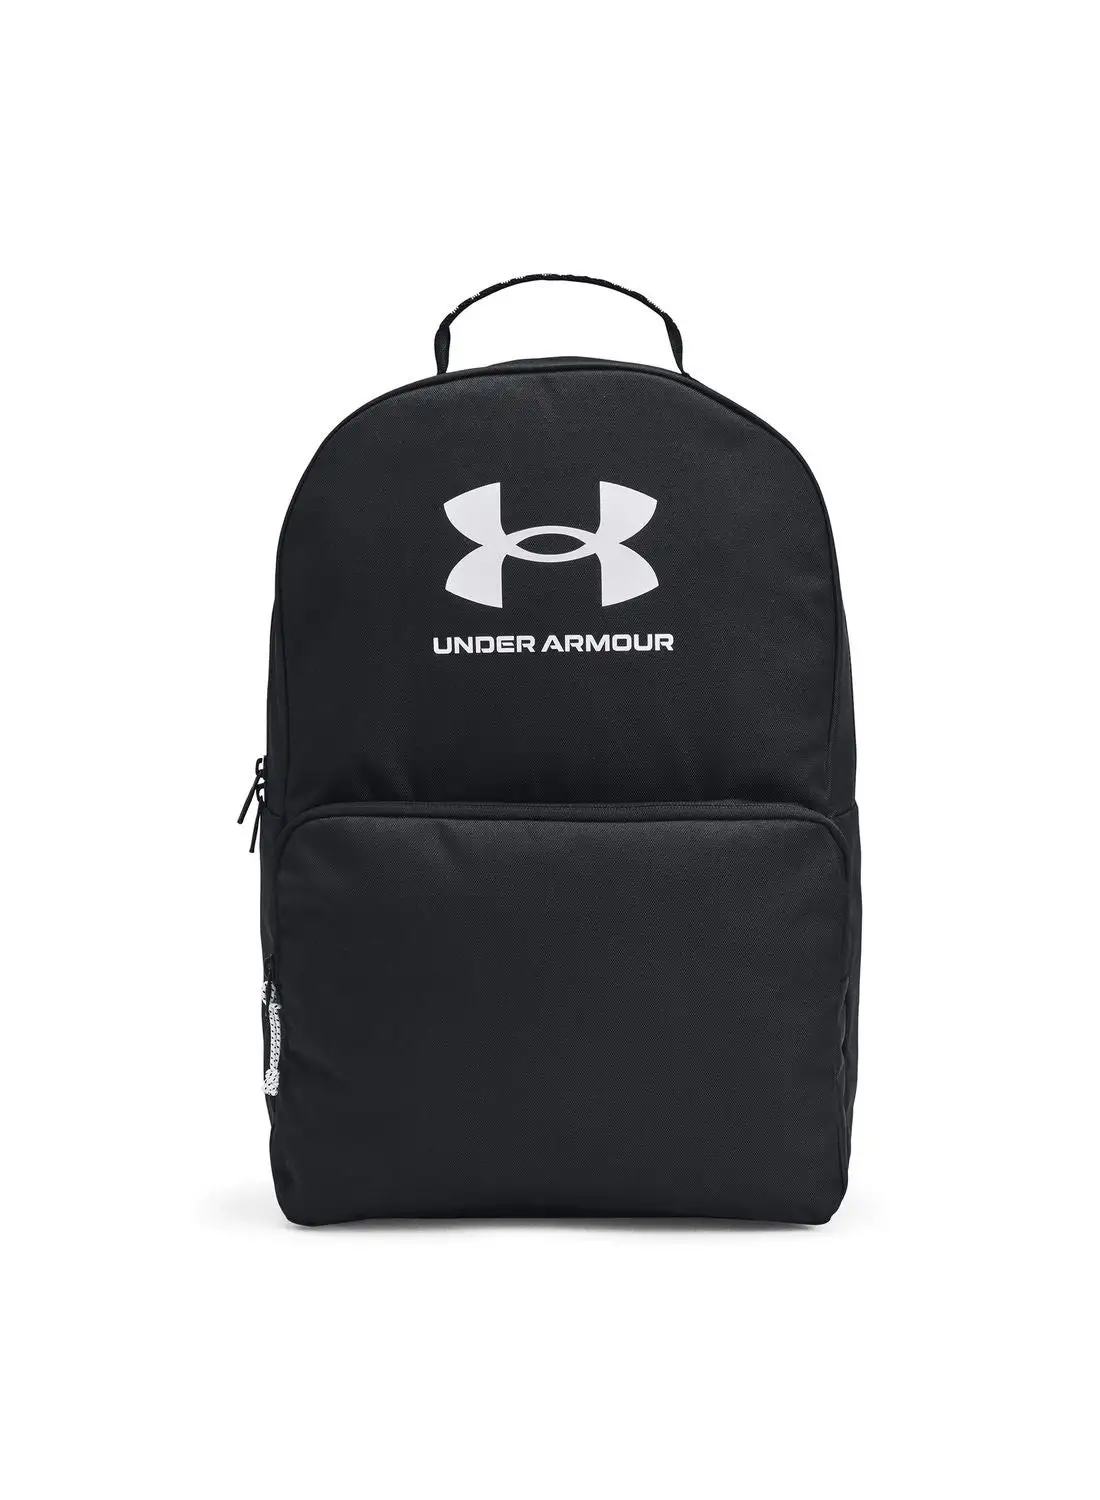 UNDER ARMOUR Loudon Backpack